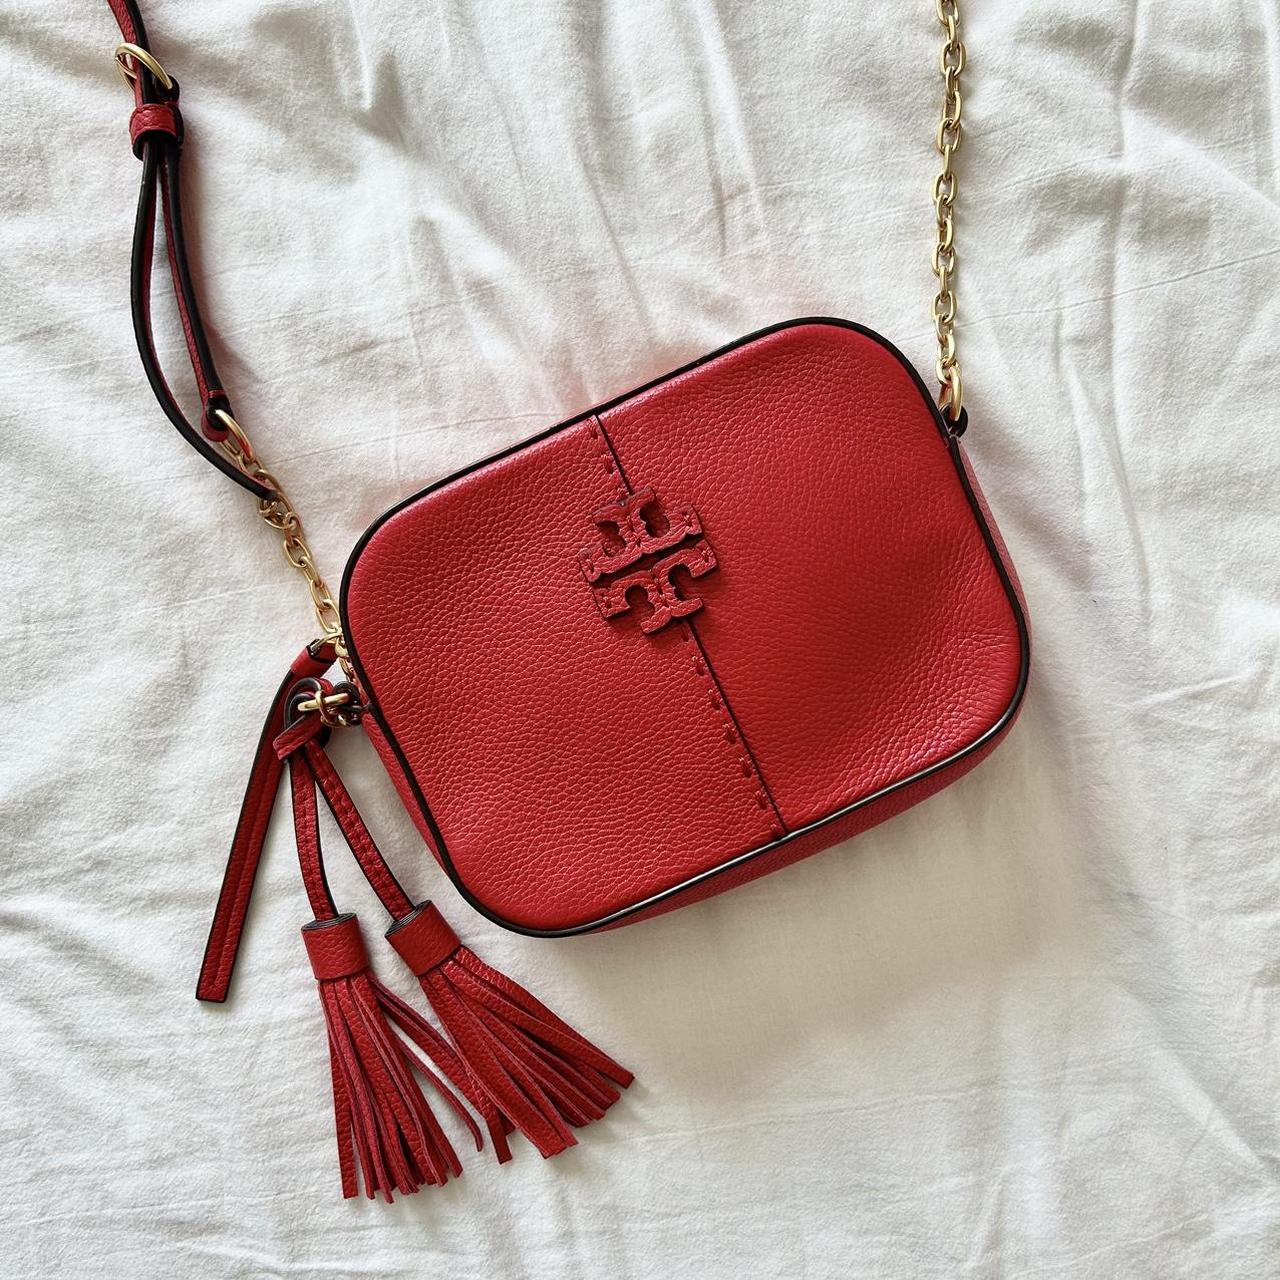 This Tory Burch Crossbody Bag at Nordstrom Is on Sale for 55% Off